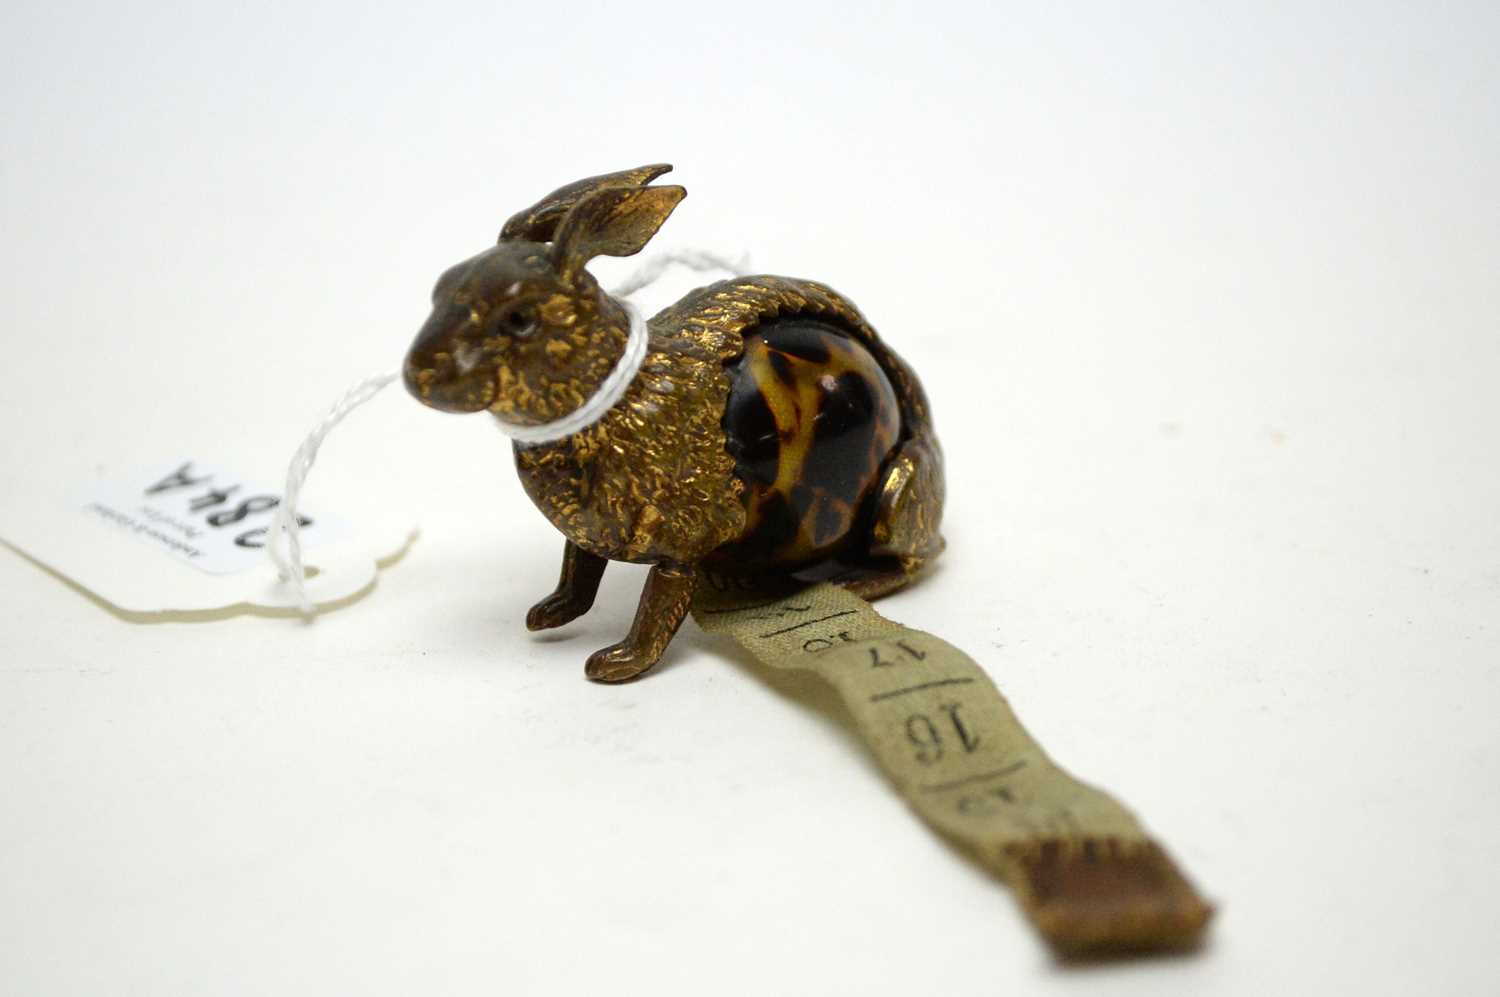 A late 19th century novelty tape measure